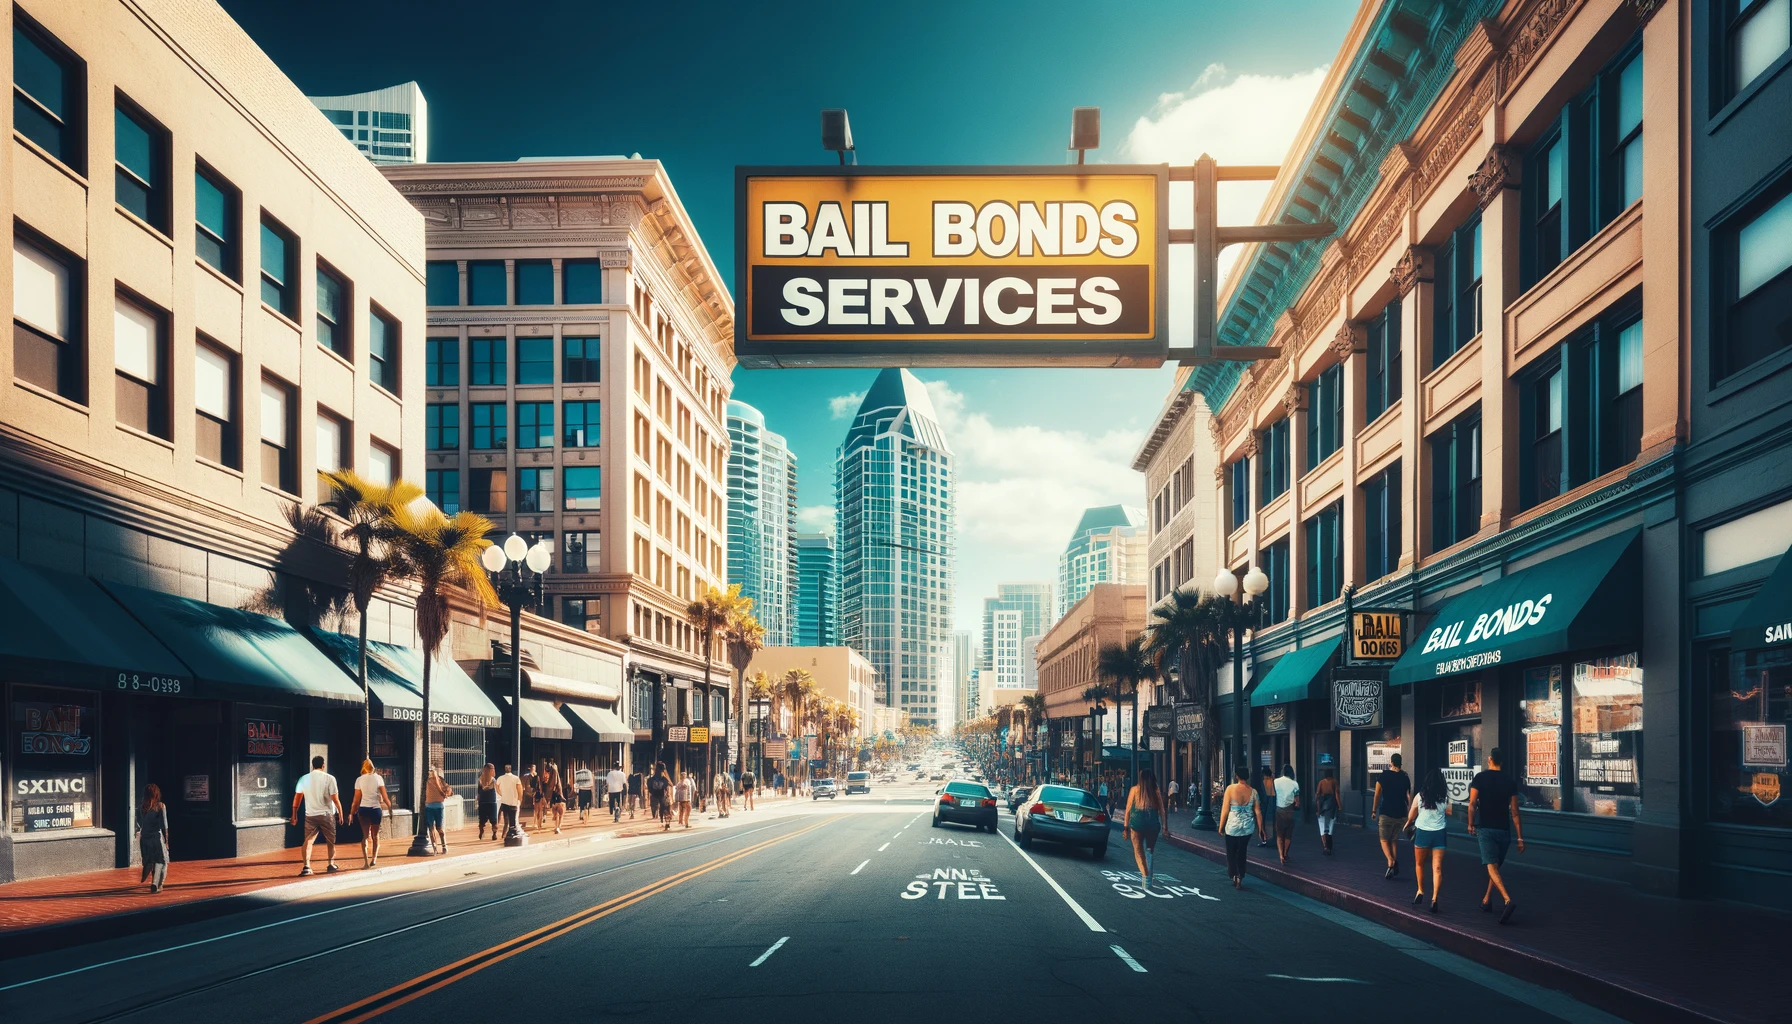 A lively downtown San Diego street scene with a 'Bail Bonds Services' sign, featuring pedestrians, cars, and Southern California architecture under clear blue skies